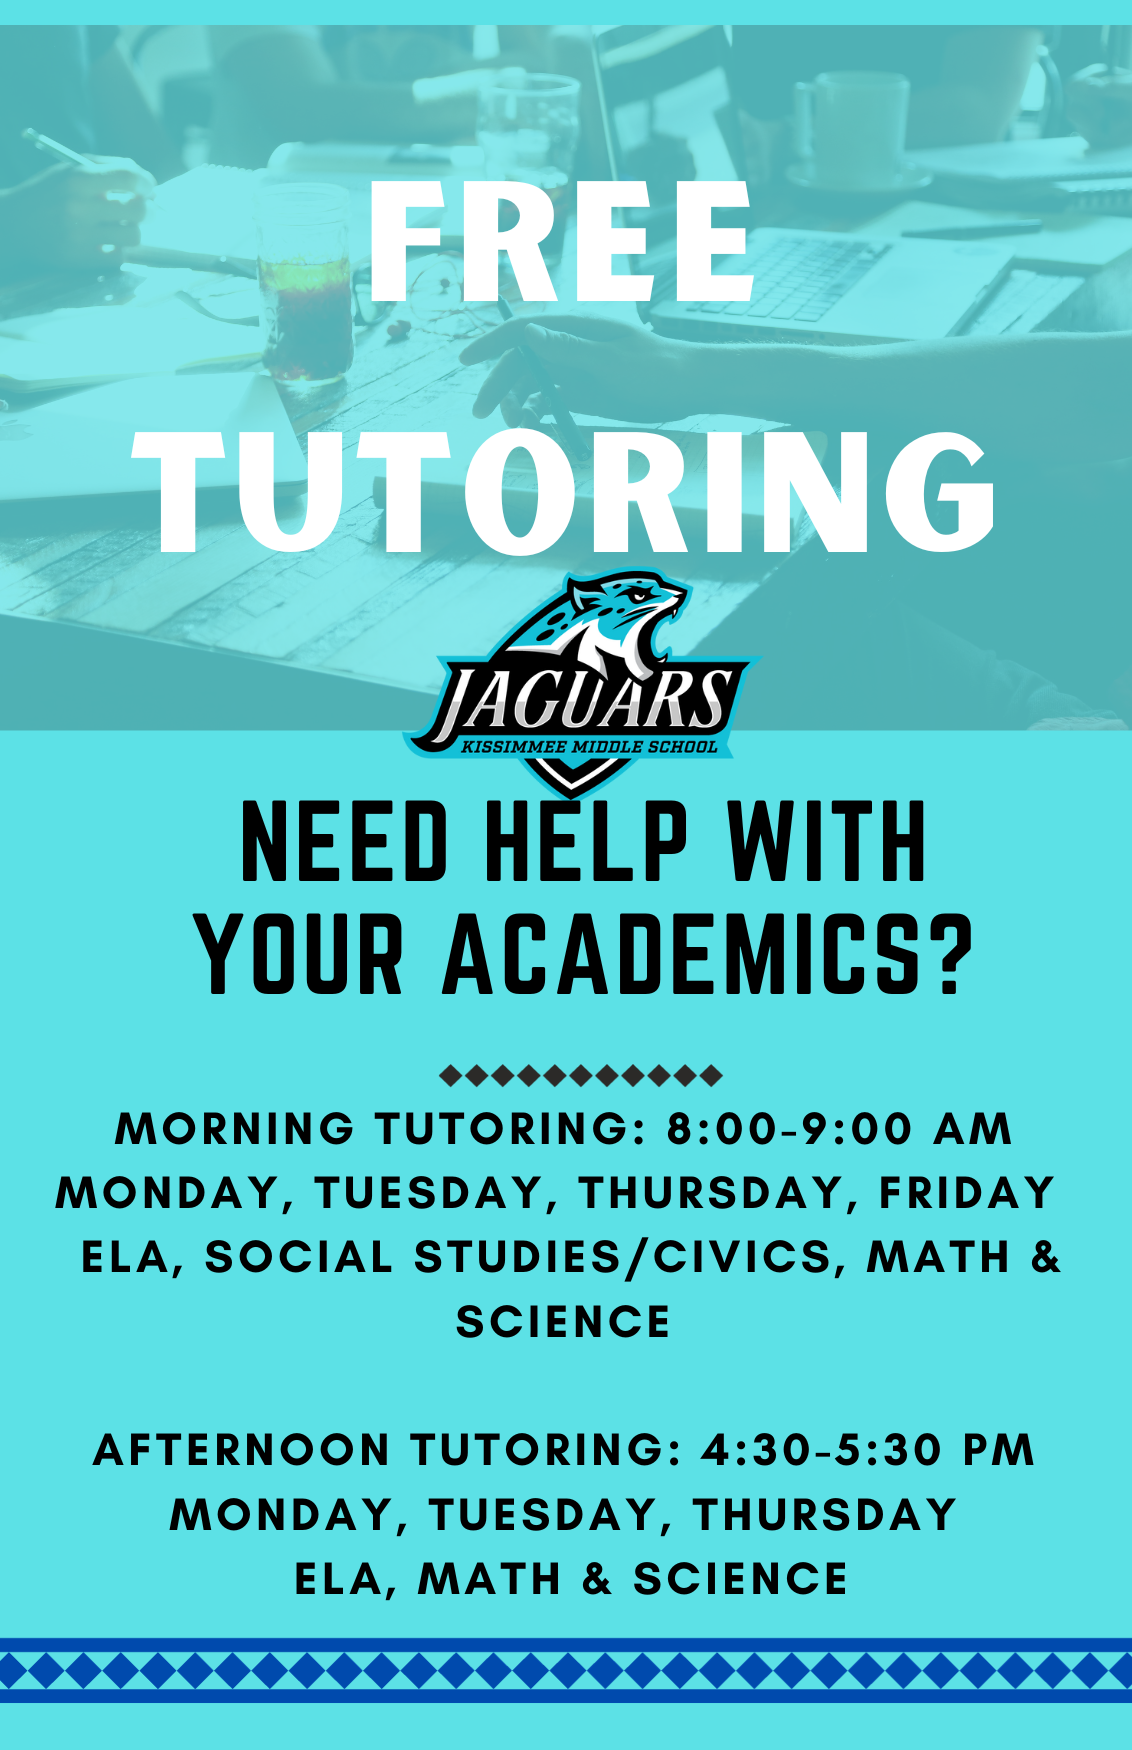 info about tutoring